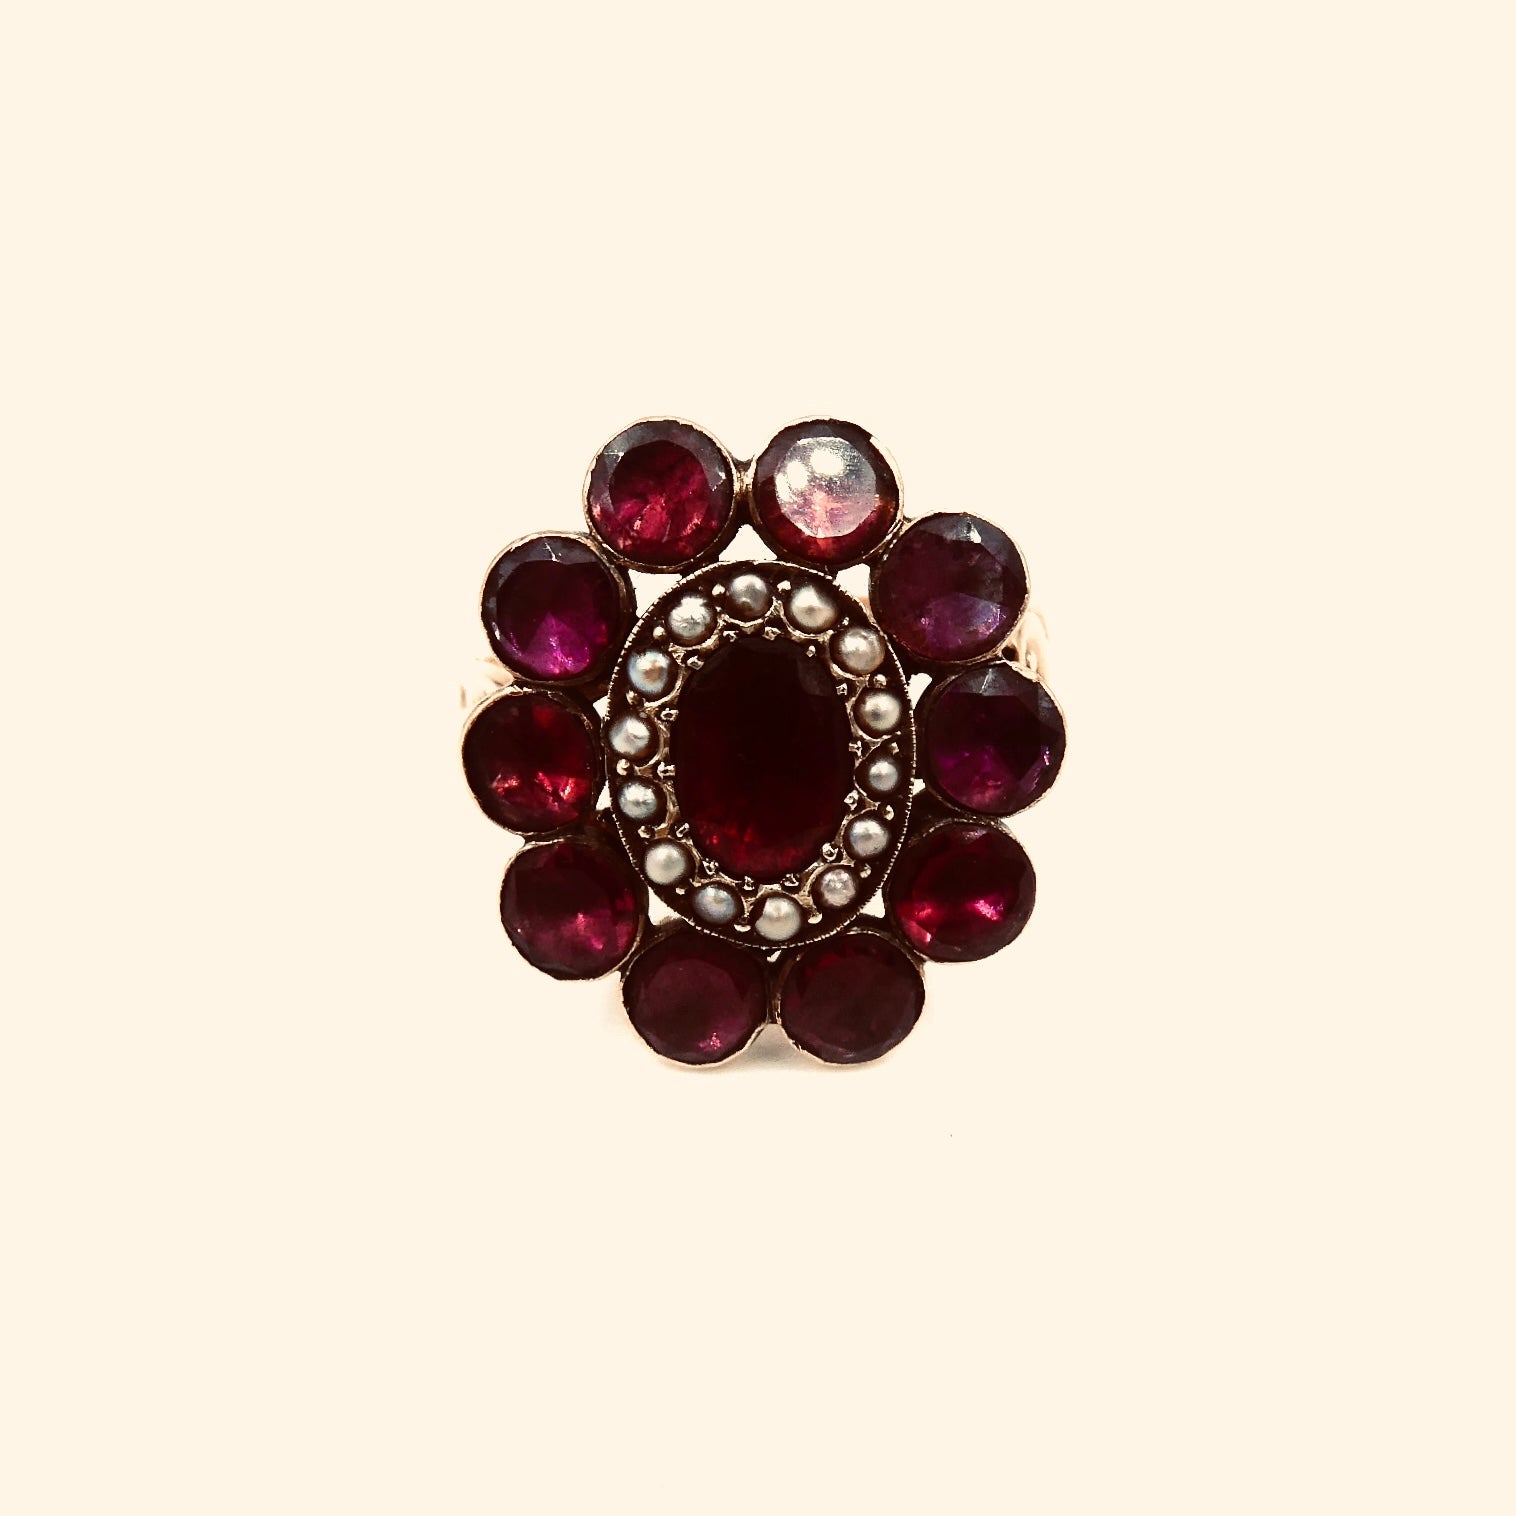 Georgian garnet and pearl ring, antique garnet pearl ring on an ornate gold band. - Collected